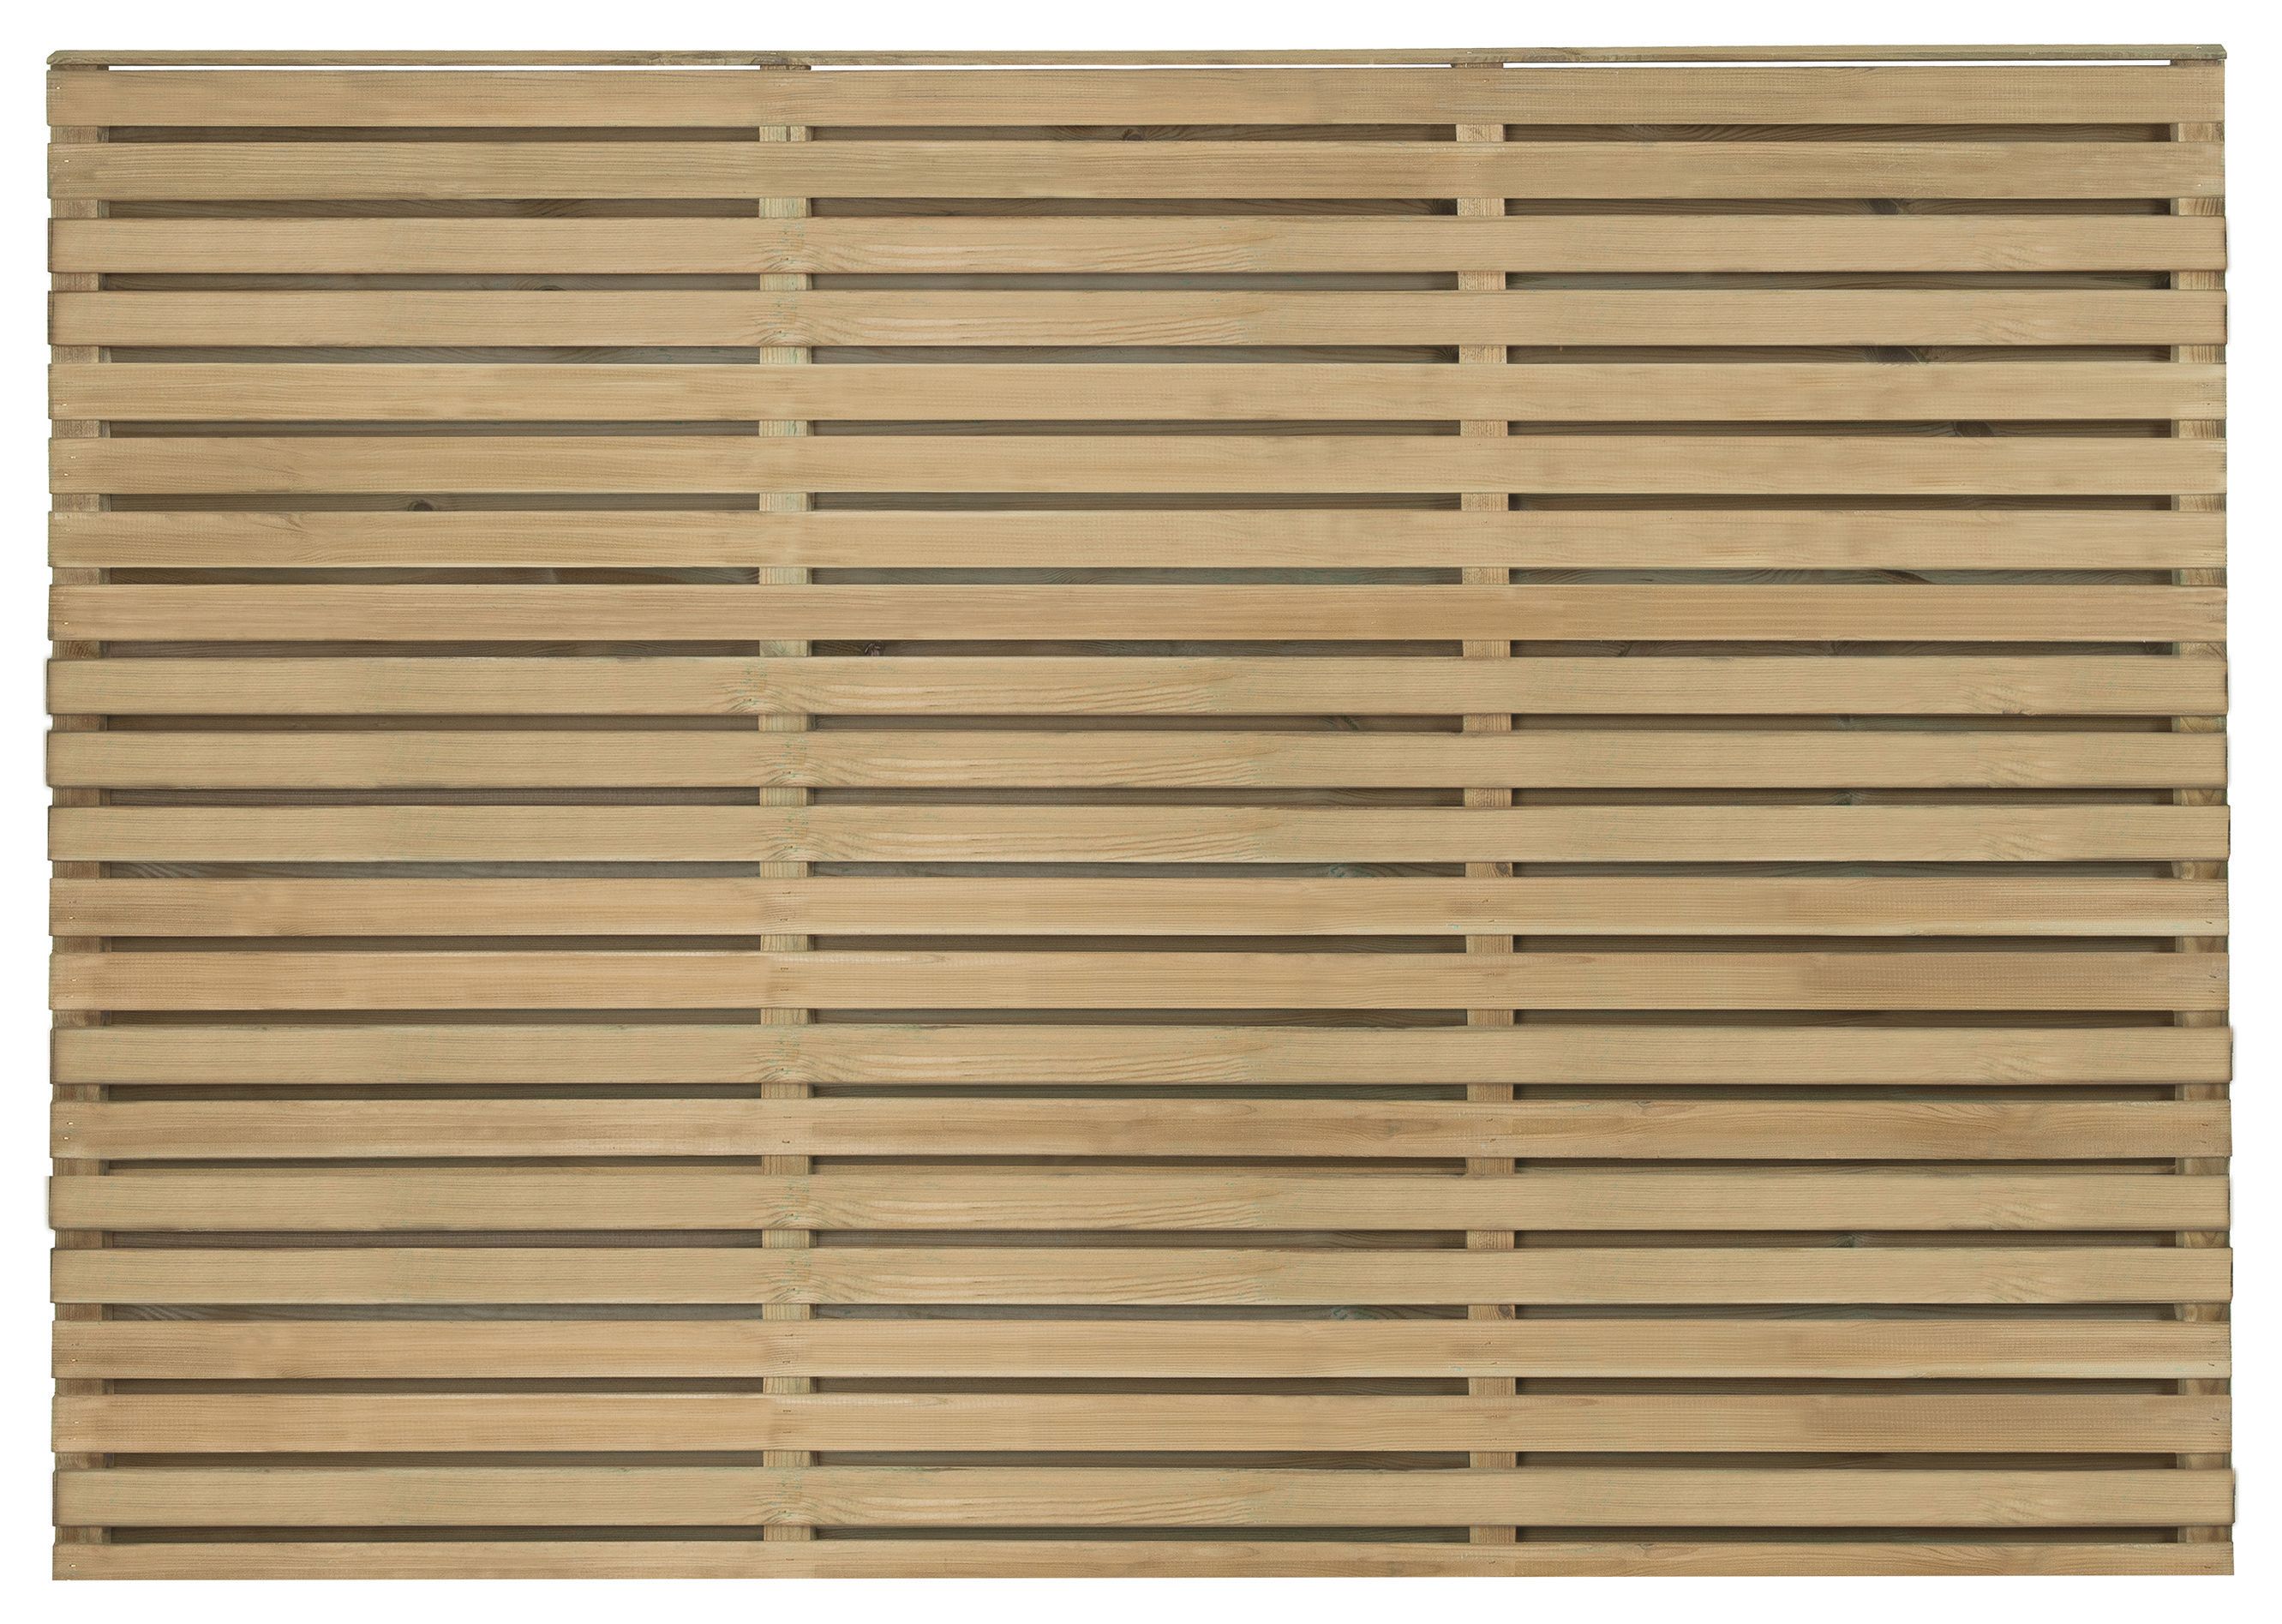 Image of Forest Garden Double Slatted Fence Panel - 1800 x 1200mm - 6 x 4ft - Pack of 3